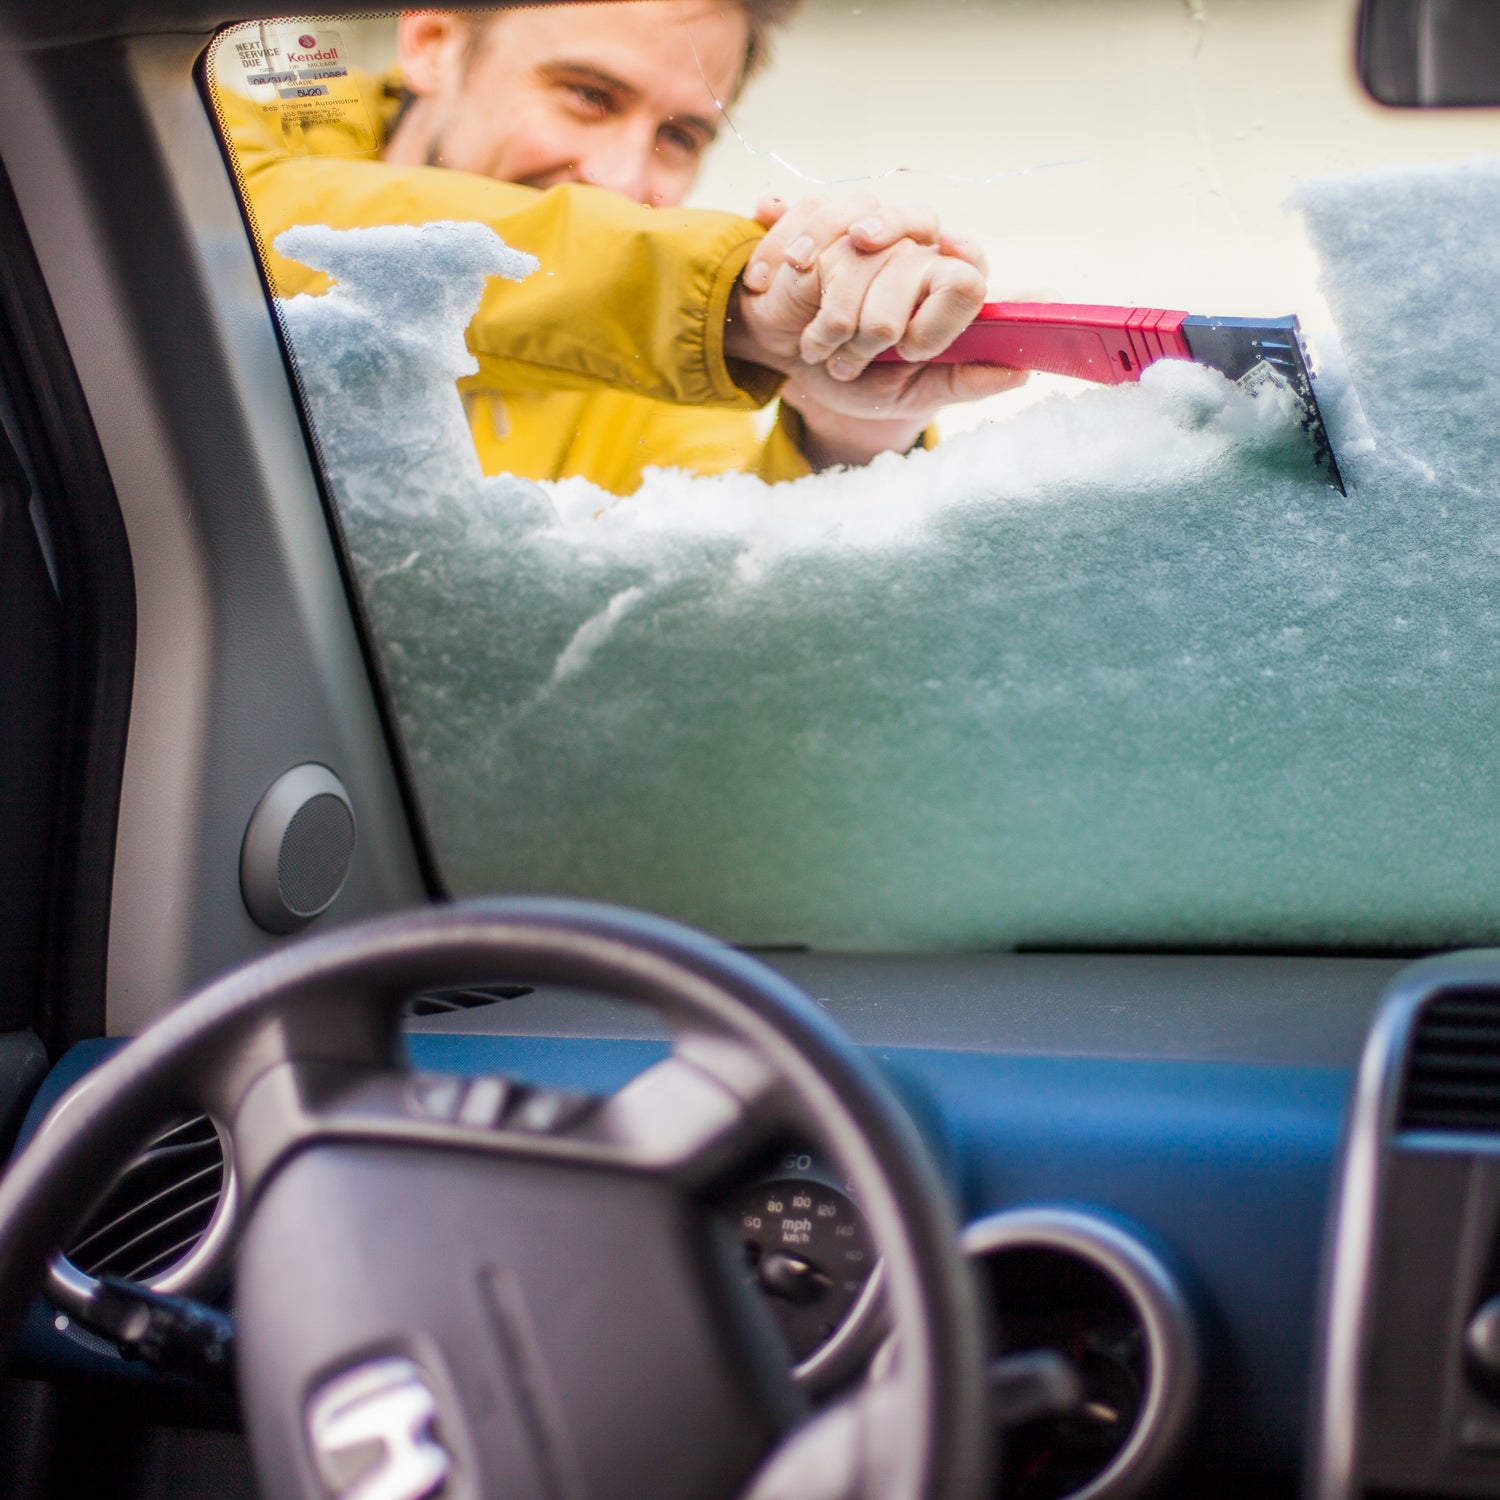 How to Properly De-Ice Your Car